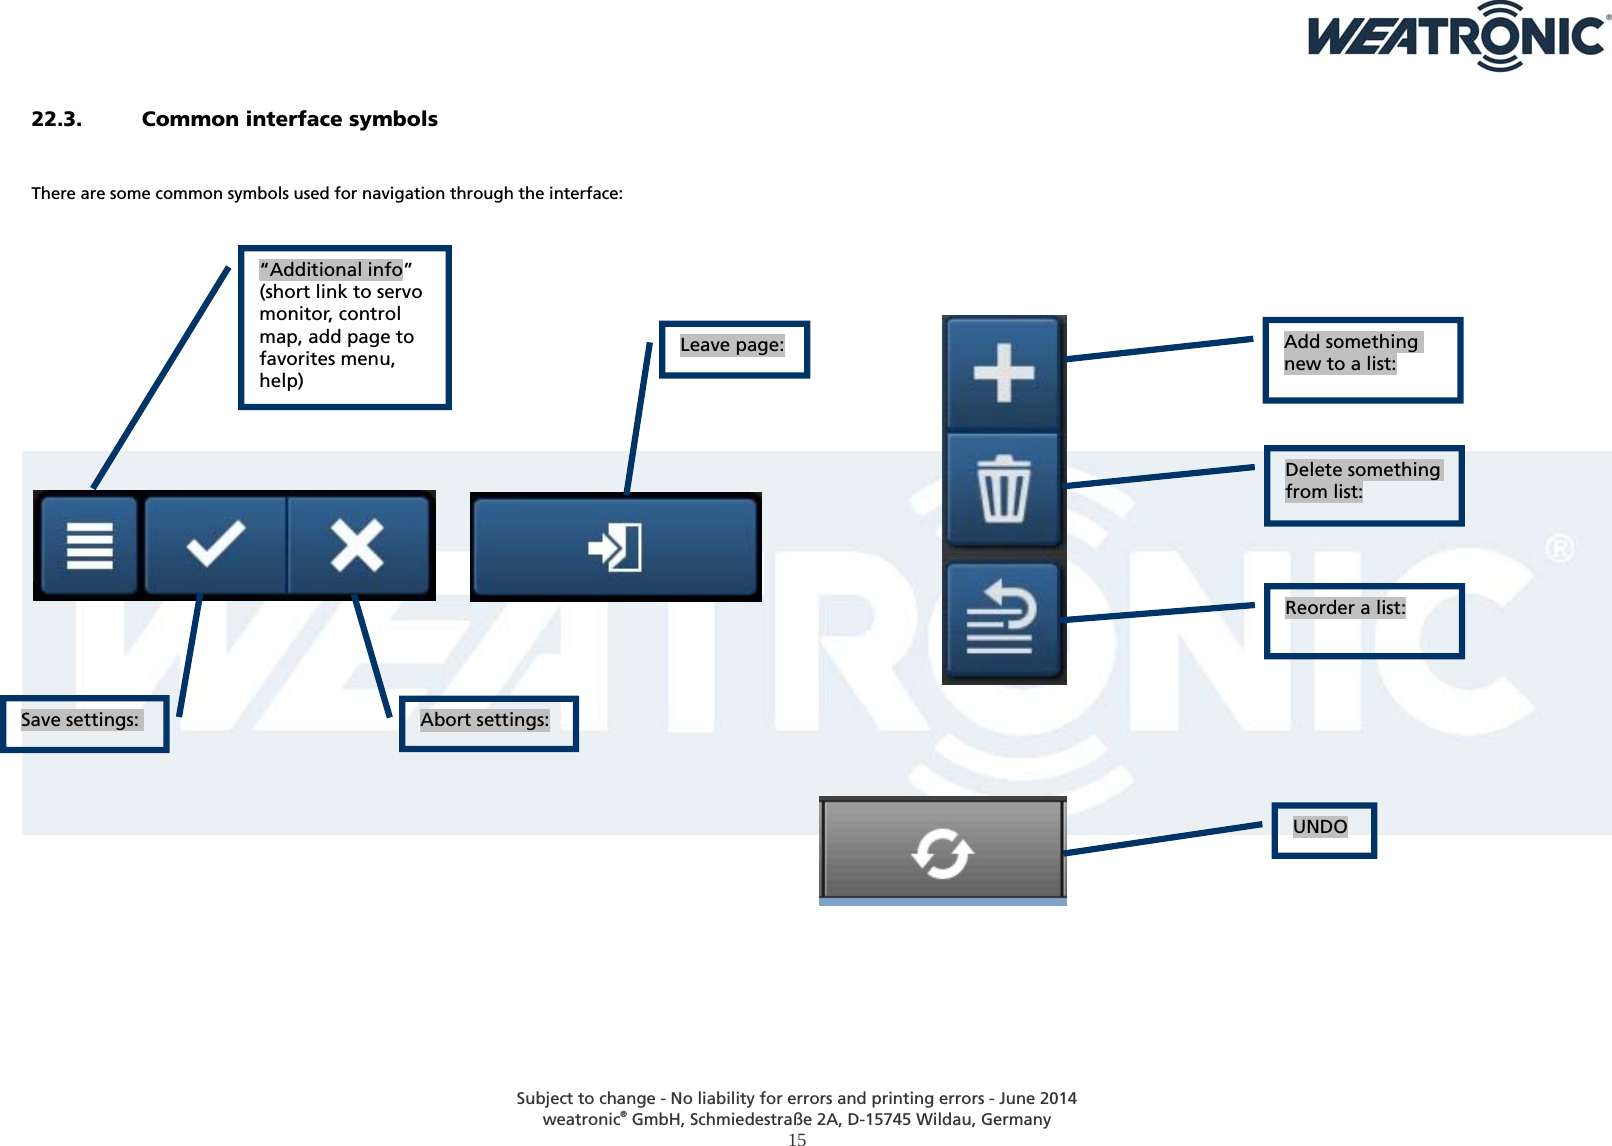  Subject to change - No liability for errors and printing errors - June 2014 weatronic® GmbH, Schmiedestraße 2A, D-15745 Wildau, Germany  15   22.3. Common interface symbols   There are some common symbols used for navigation through the interface:                          “Additional info” (short link to servo monitor, control map, add page to favorites menu, help) Save settings:  Leave page:Abort settings:Add something new to a list: Delete something from list: Reorder a list:UNDO